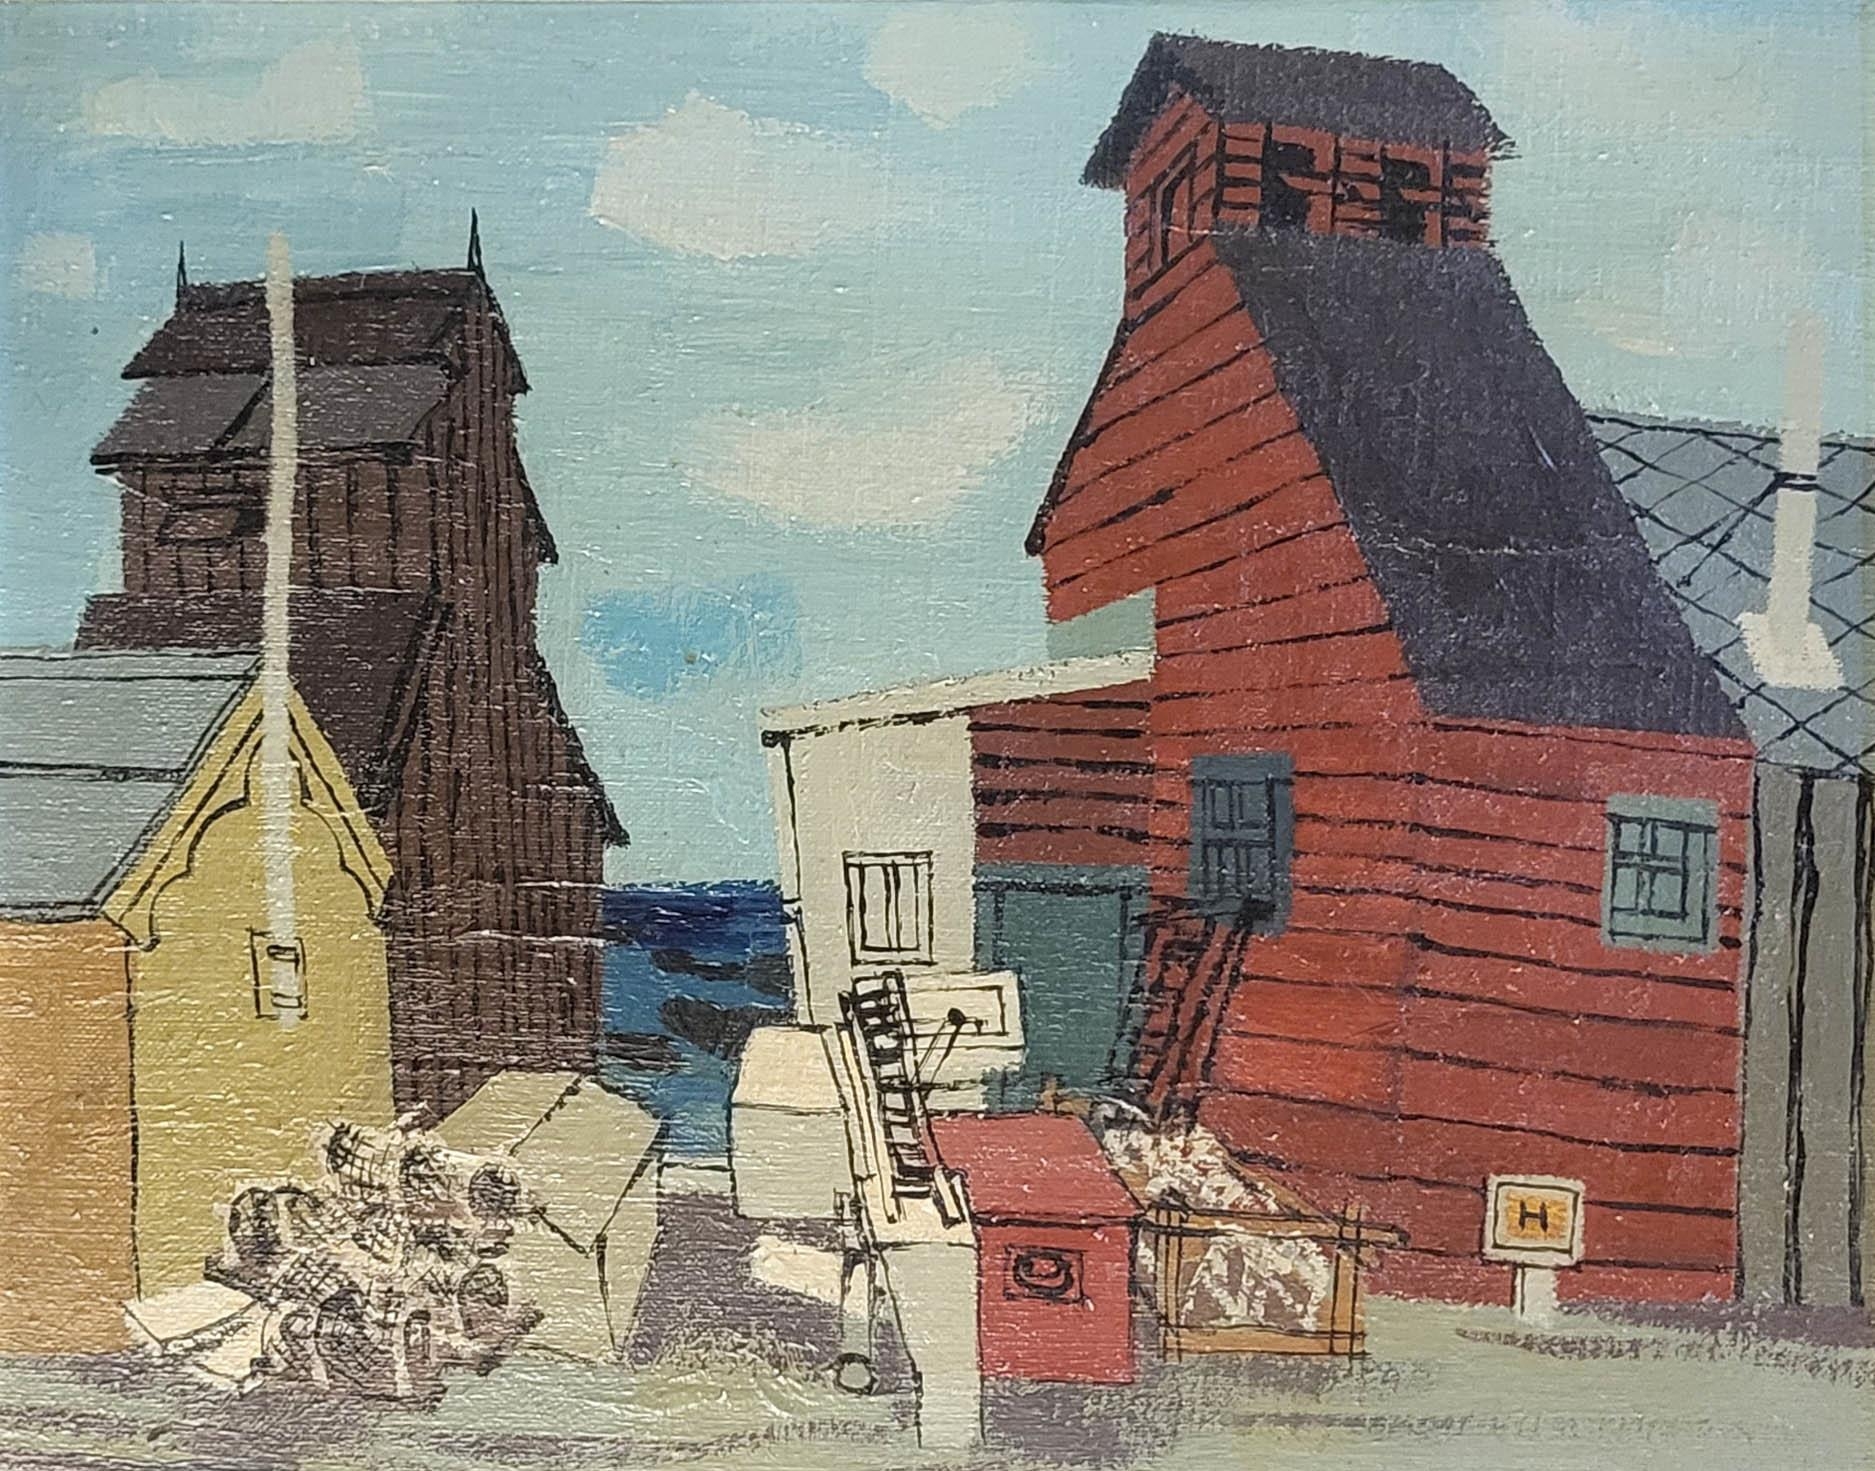 JACK FIRTH, SCOTTISH, 1917 - 2010, OIL ON ACRYLIC ON CANVAS BOARD Curing Sheds, Artists label verso, - Image 3 of 5